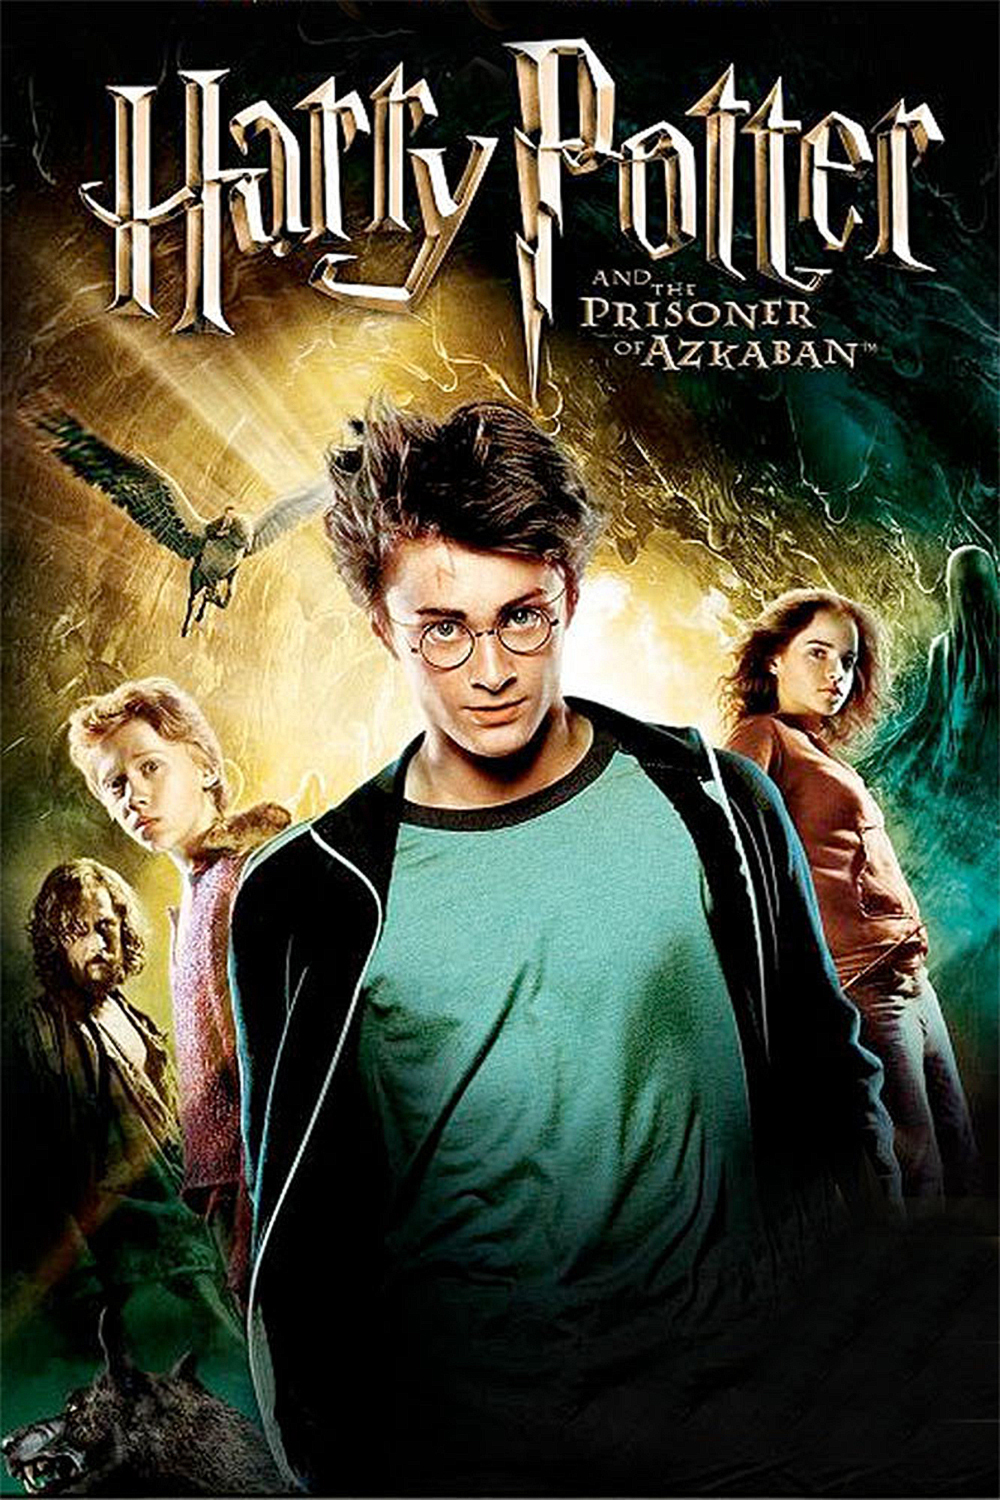 Harry Potter and the Prisoner of Azkaban by Netanel Blinder - Illustrated by Joanne Rowling - Ourboox.com